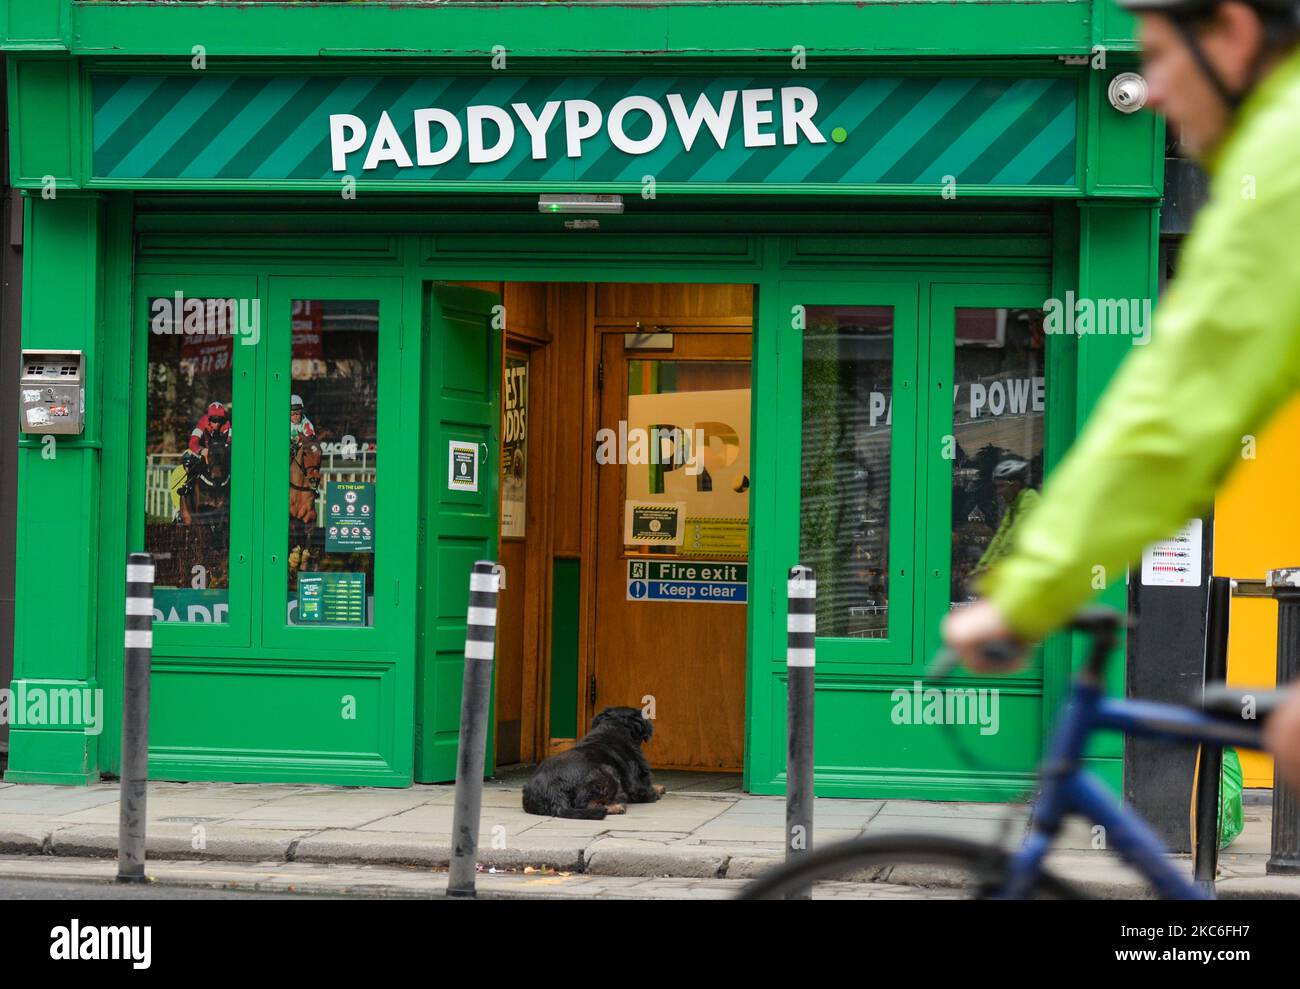 A dog awaits for his owner outside Paddy Power office in Dublin city centre on St. Stephen's Day. Taoiseach Micheal Martin announced on December 22nd a series of new Level 5 restrictions designed to contain the spread of the coronavirus. Among them are restrictions on the movement of people and the opening of all non-essential retail shops (shops may remain open but have to postpone January sales). The Department of Health reported today a new daily record of new cases for the Republic of Ireland, with 1,296 new cases and 6 deaths (2,294 new cases and 26 deaths confirmed on the island of Irela Stock Photo